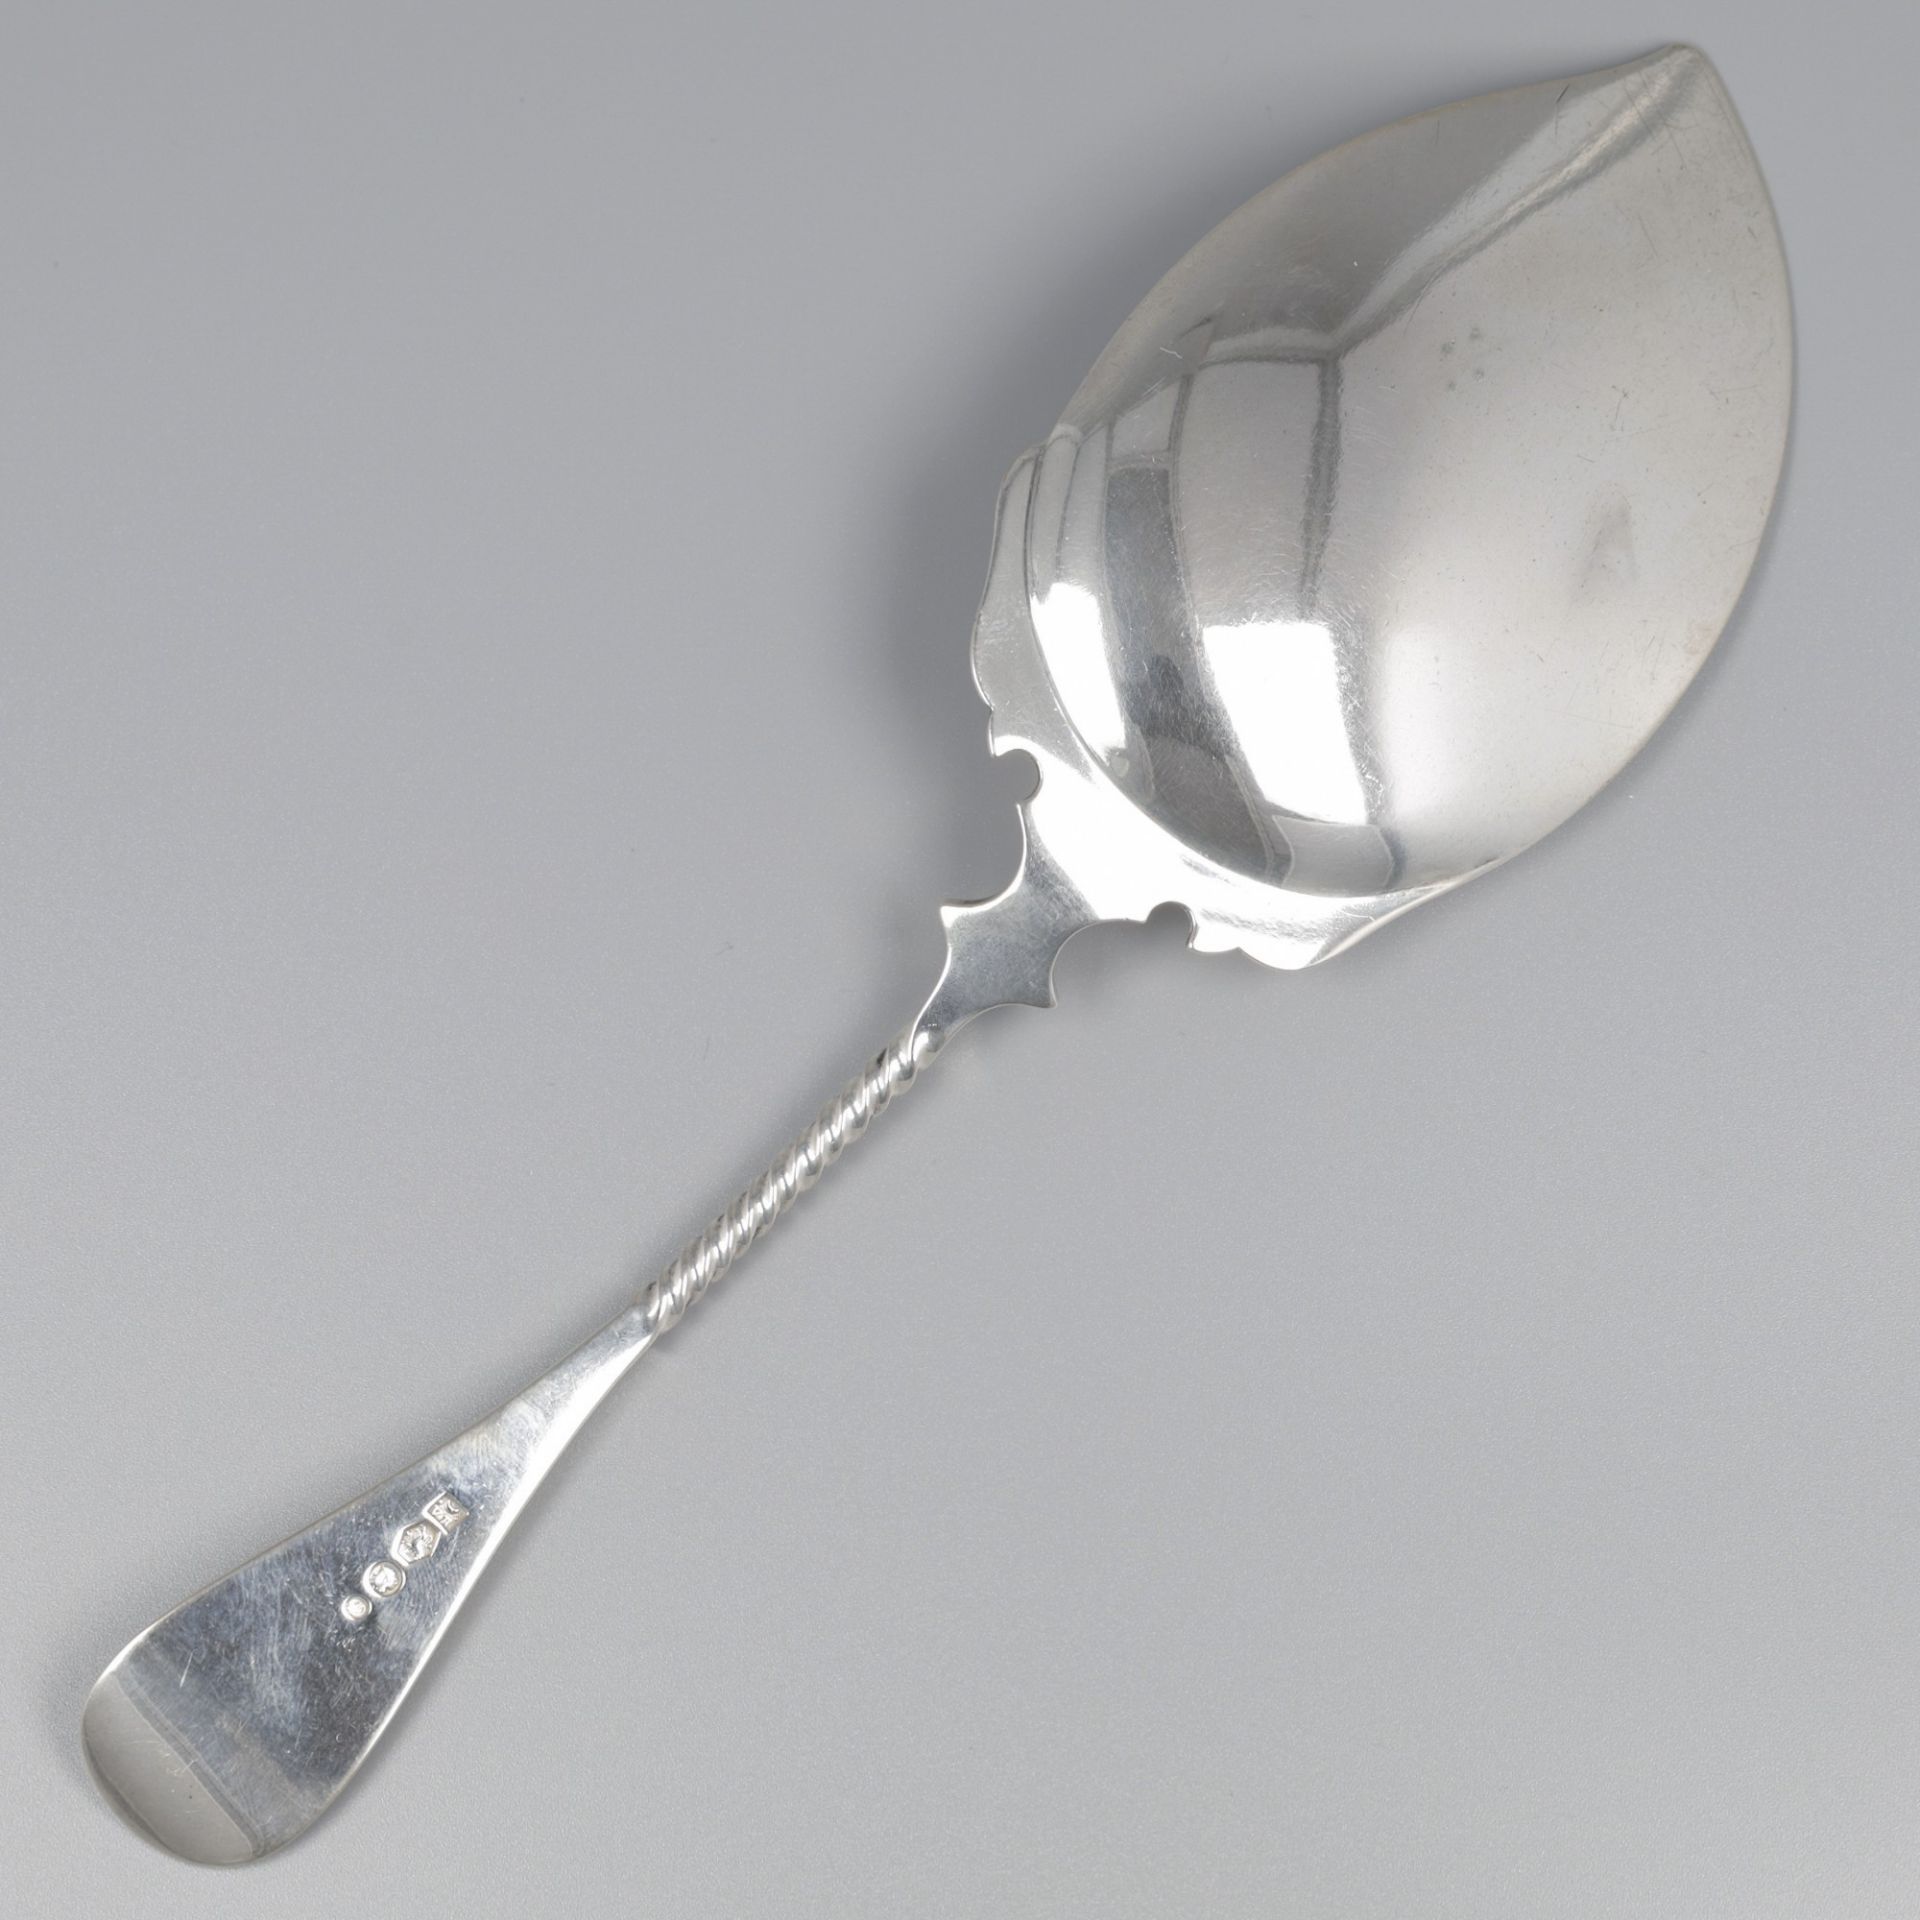 No reserve - Pastry scoop silver. - Image 4 of 5